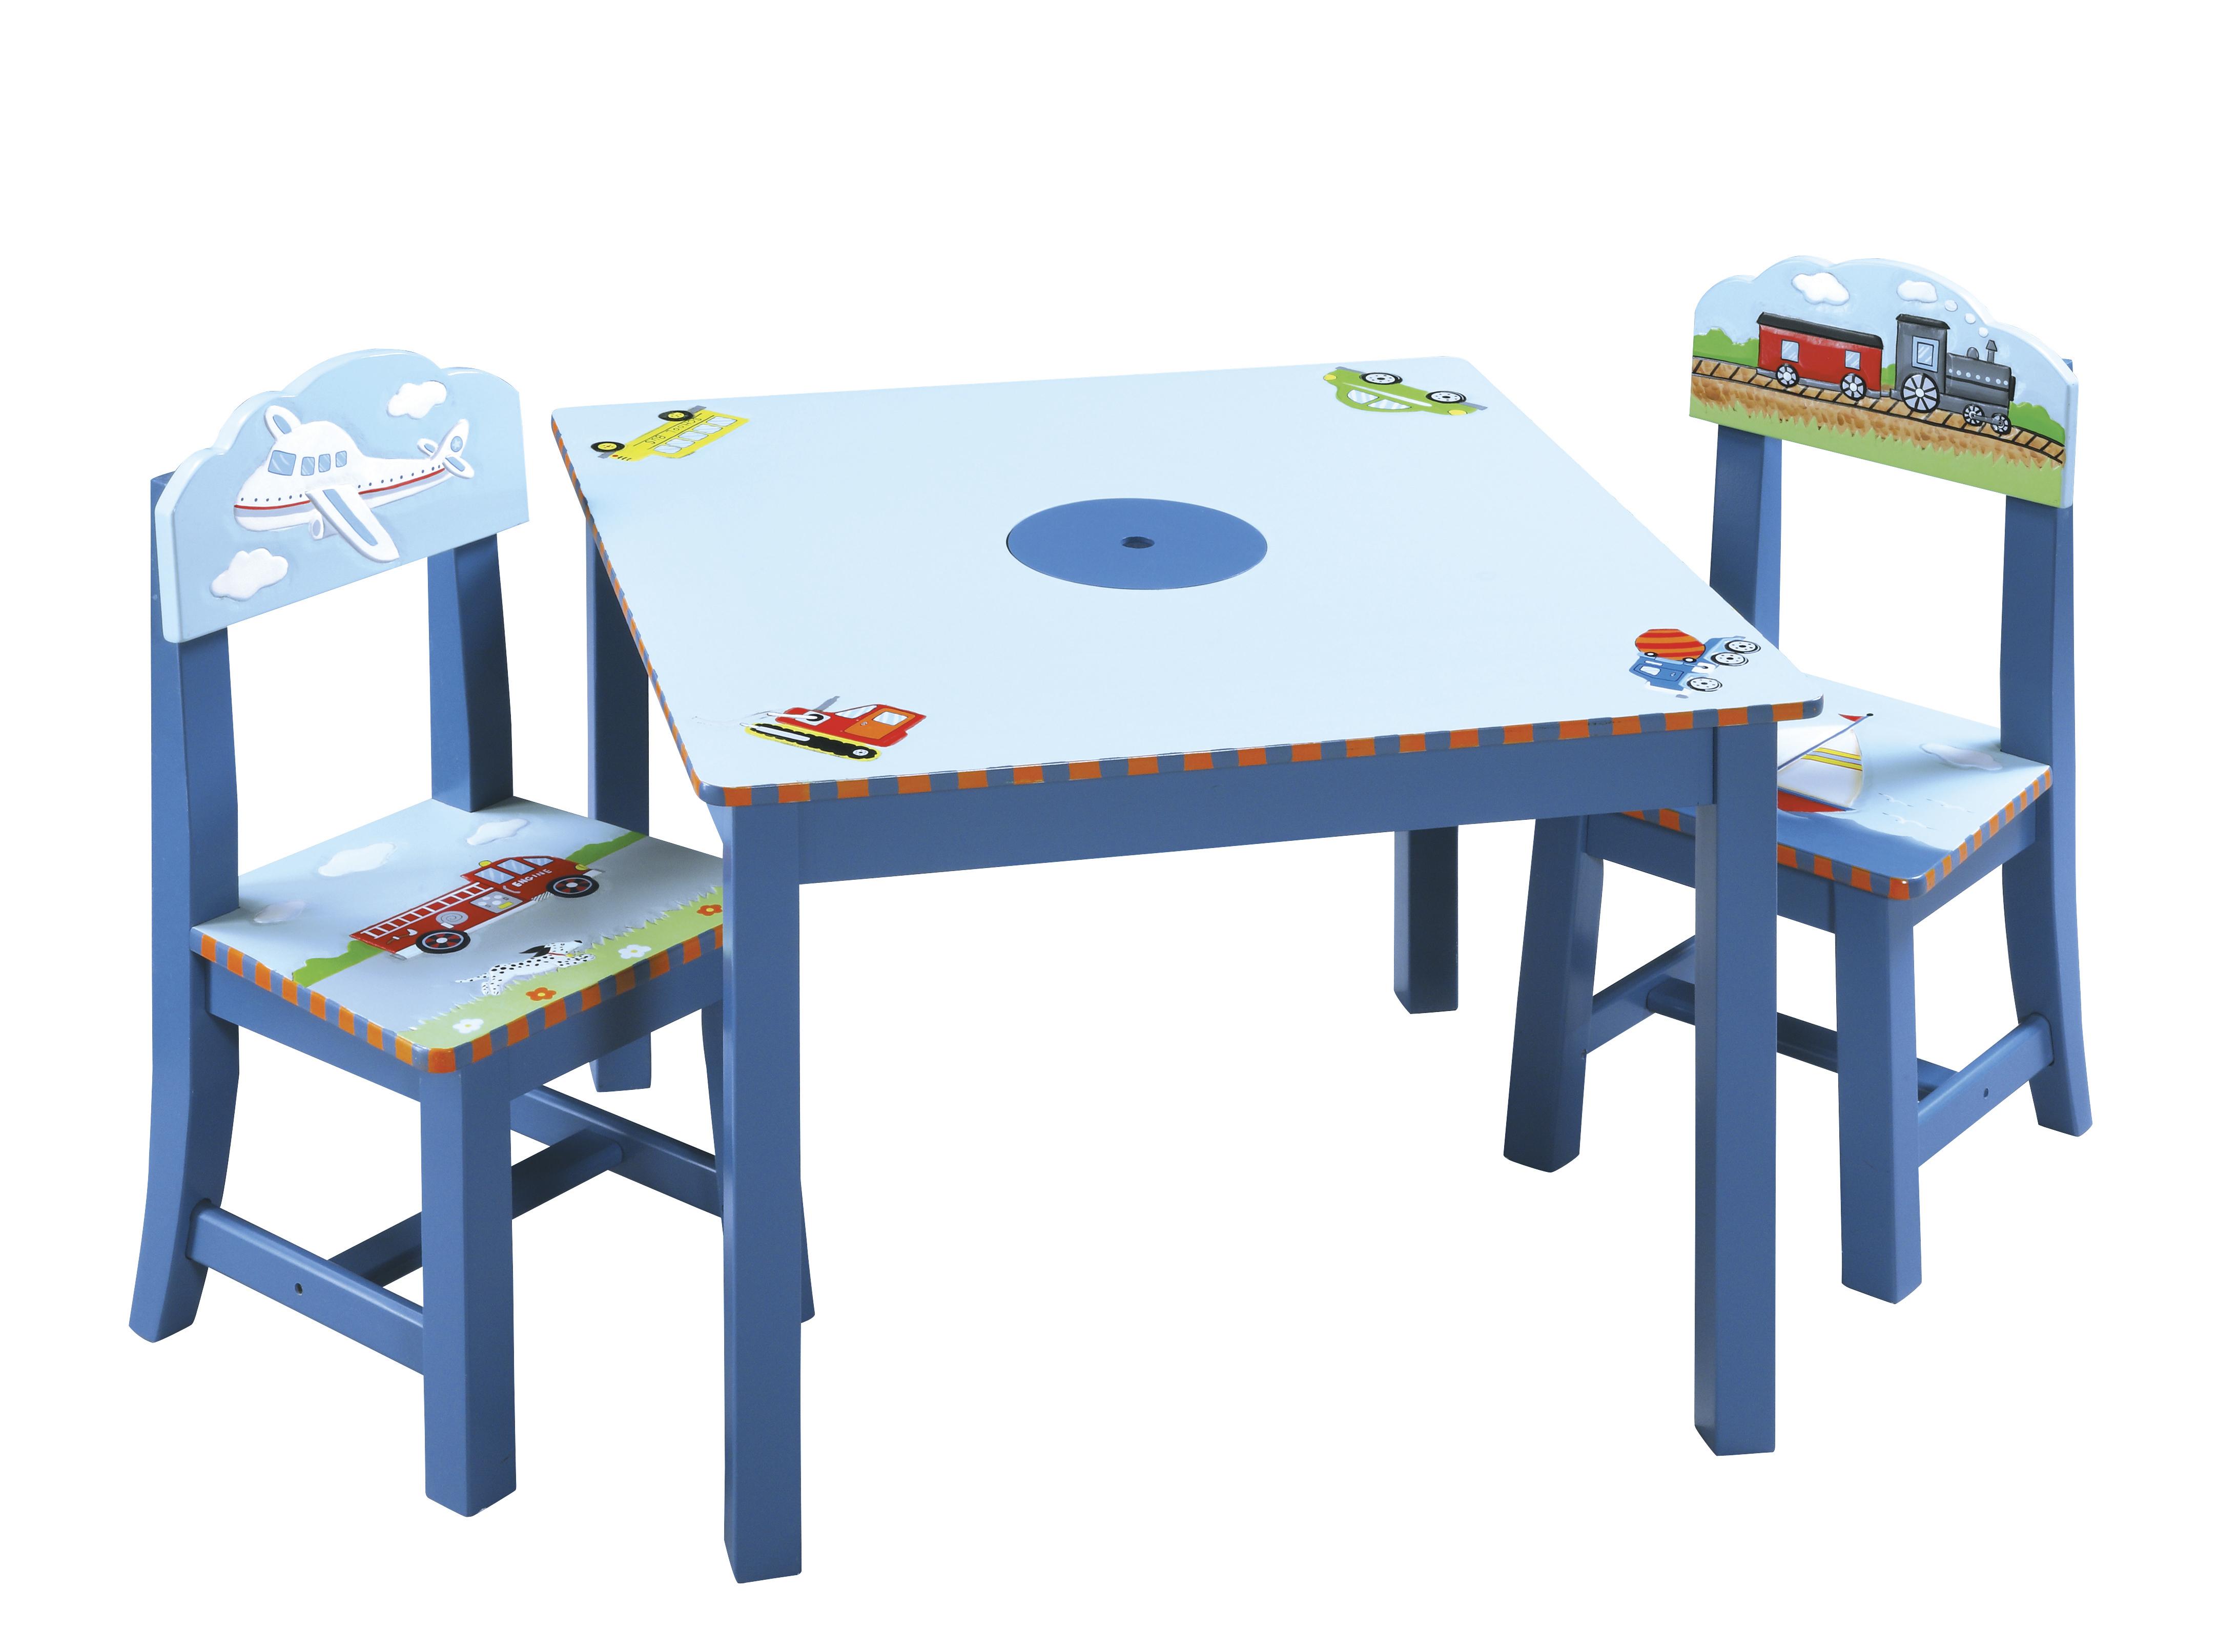 Guidecraft Transportaion Table Chairs